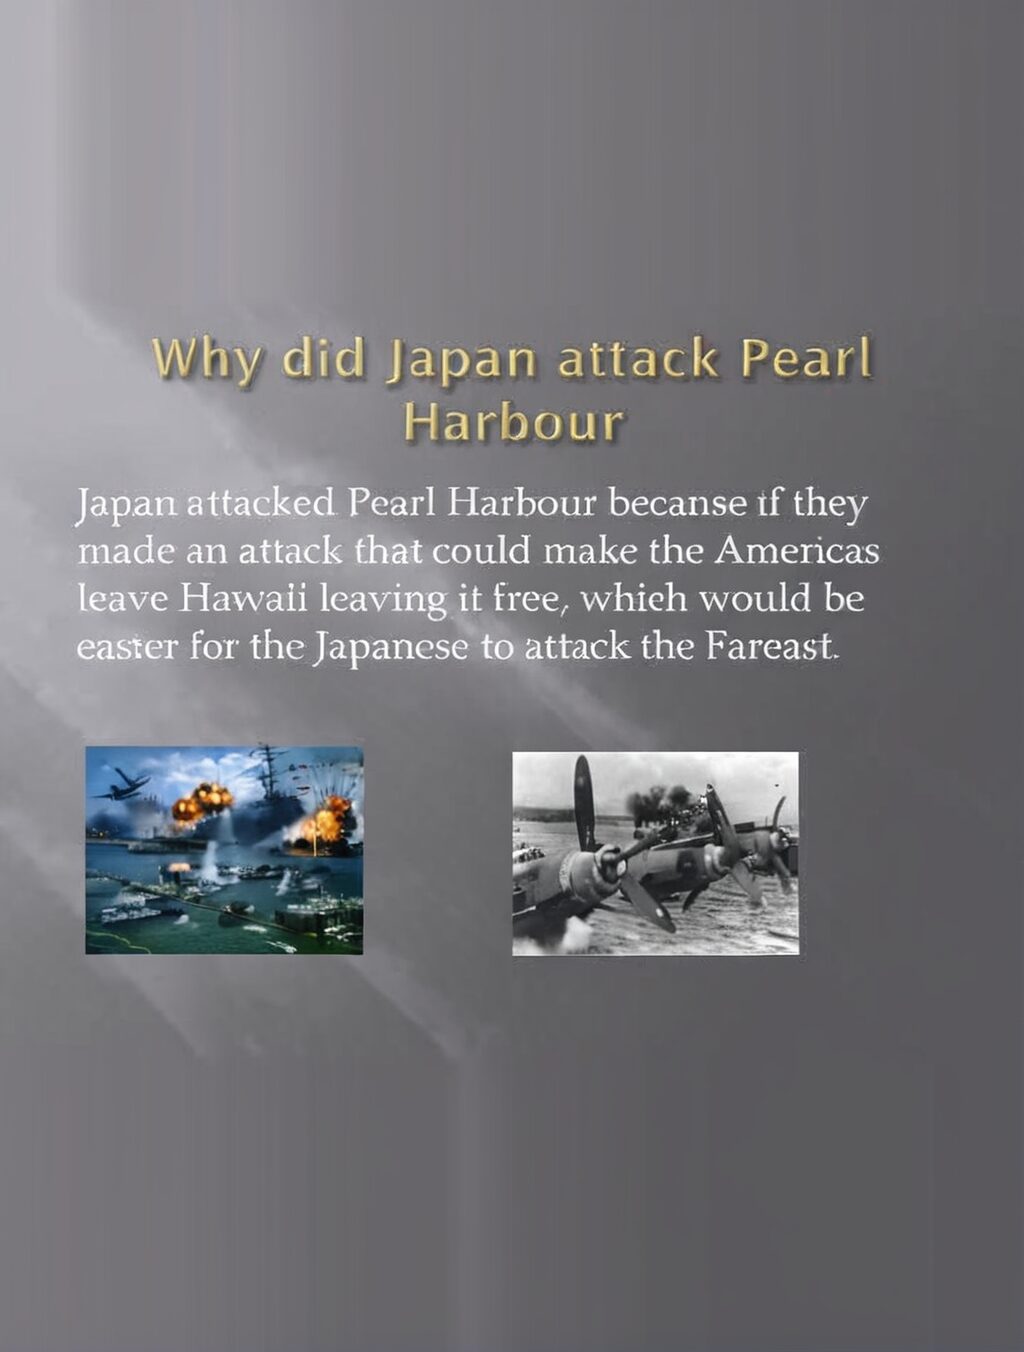 why did japan decide to attack pearl harbor quizlet